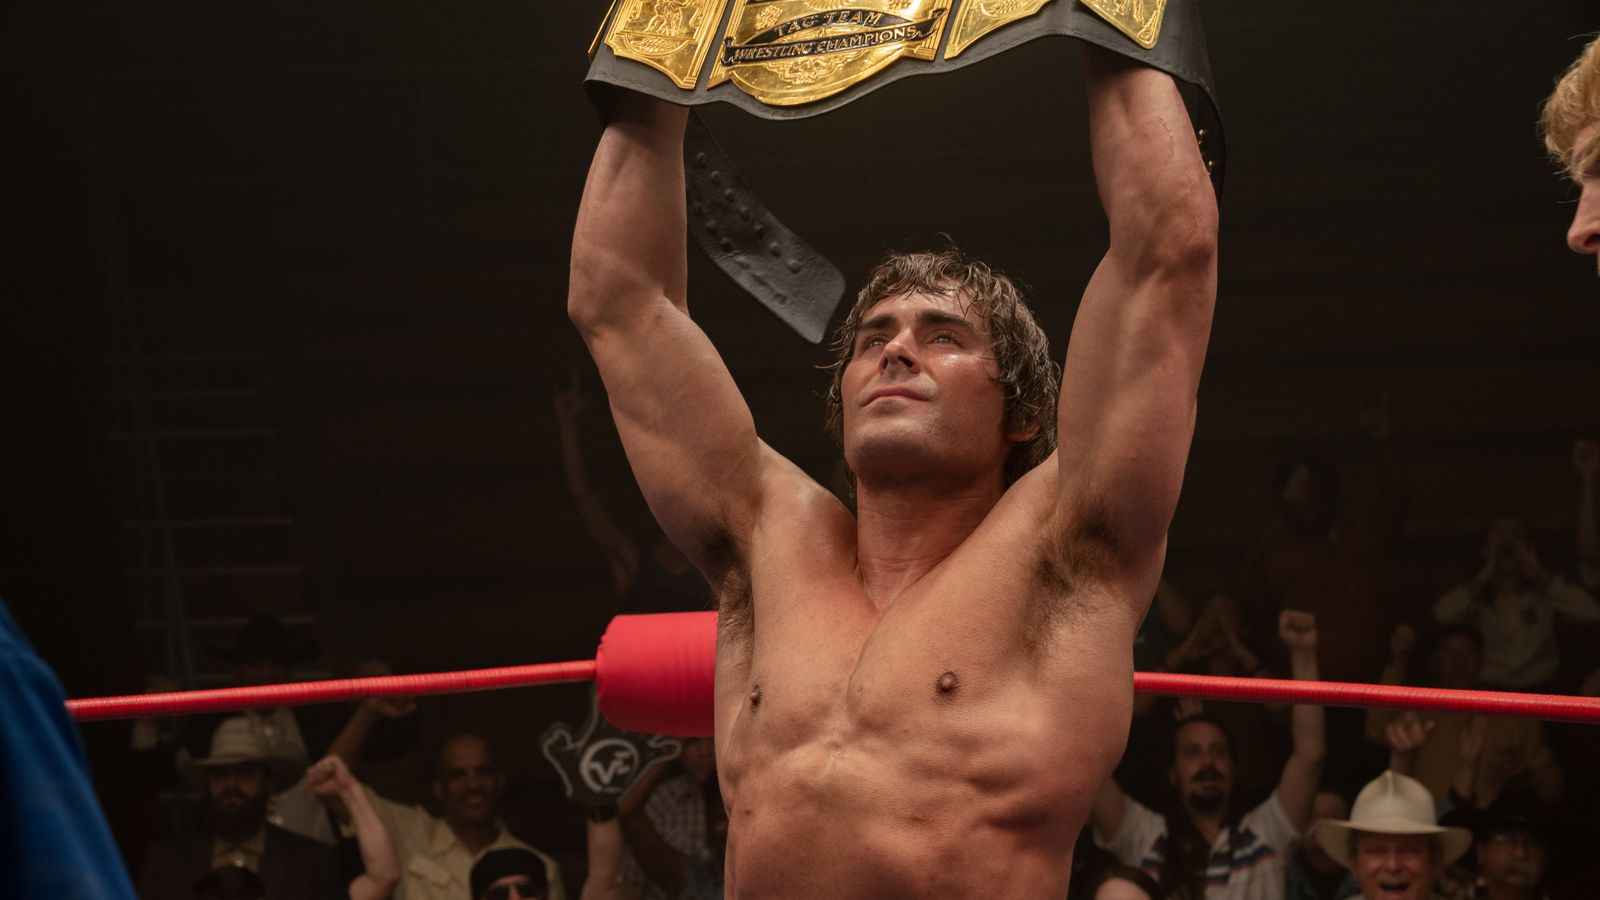 Toxic masculinity and wrestling: Zac Efron on his role in The Iron Claw